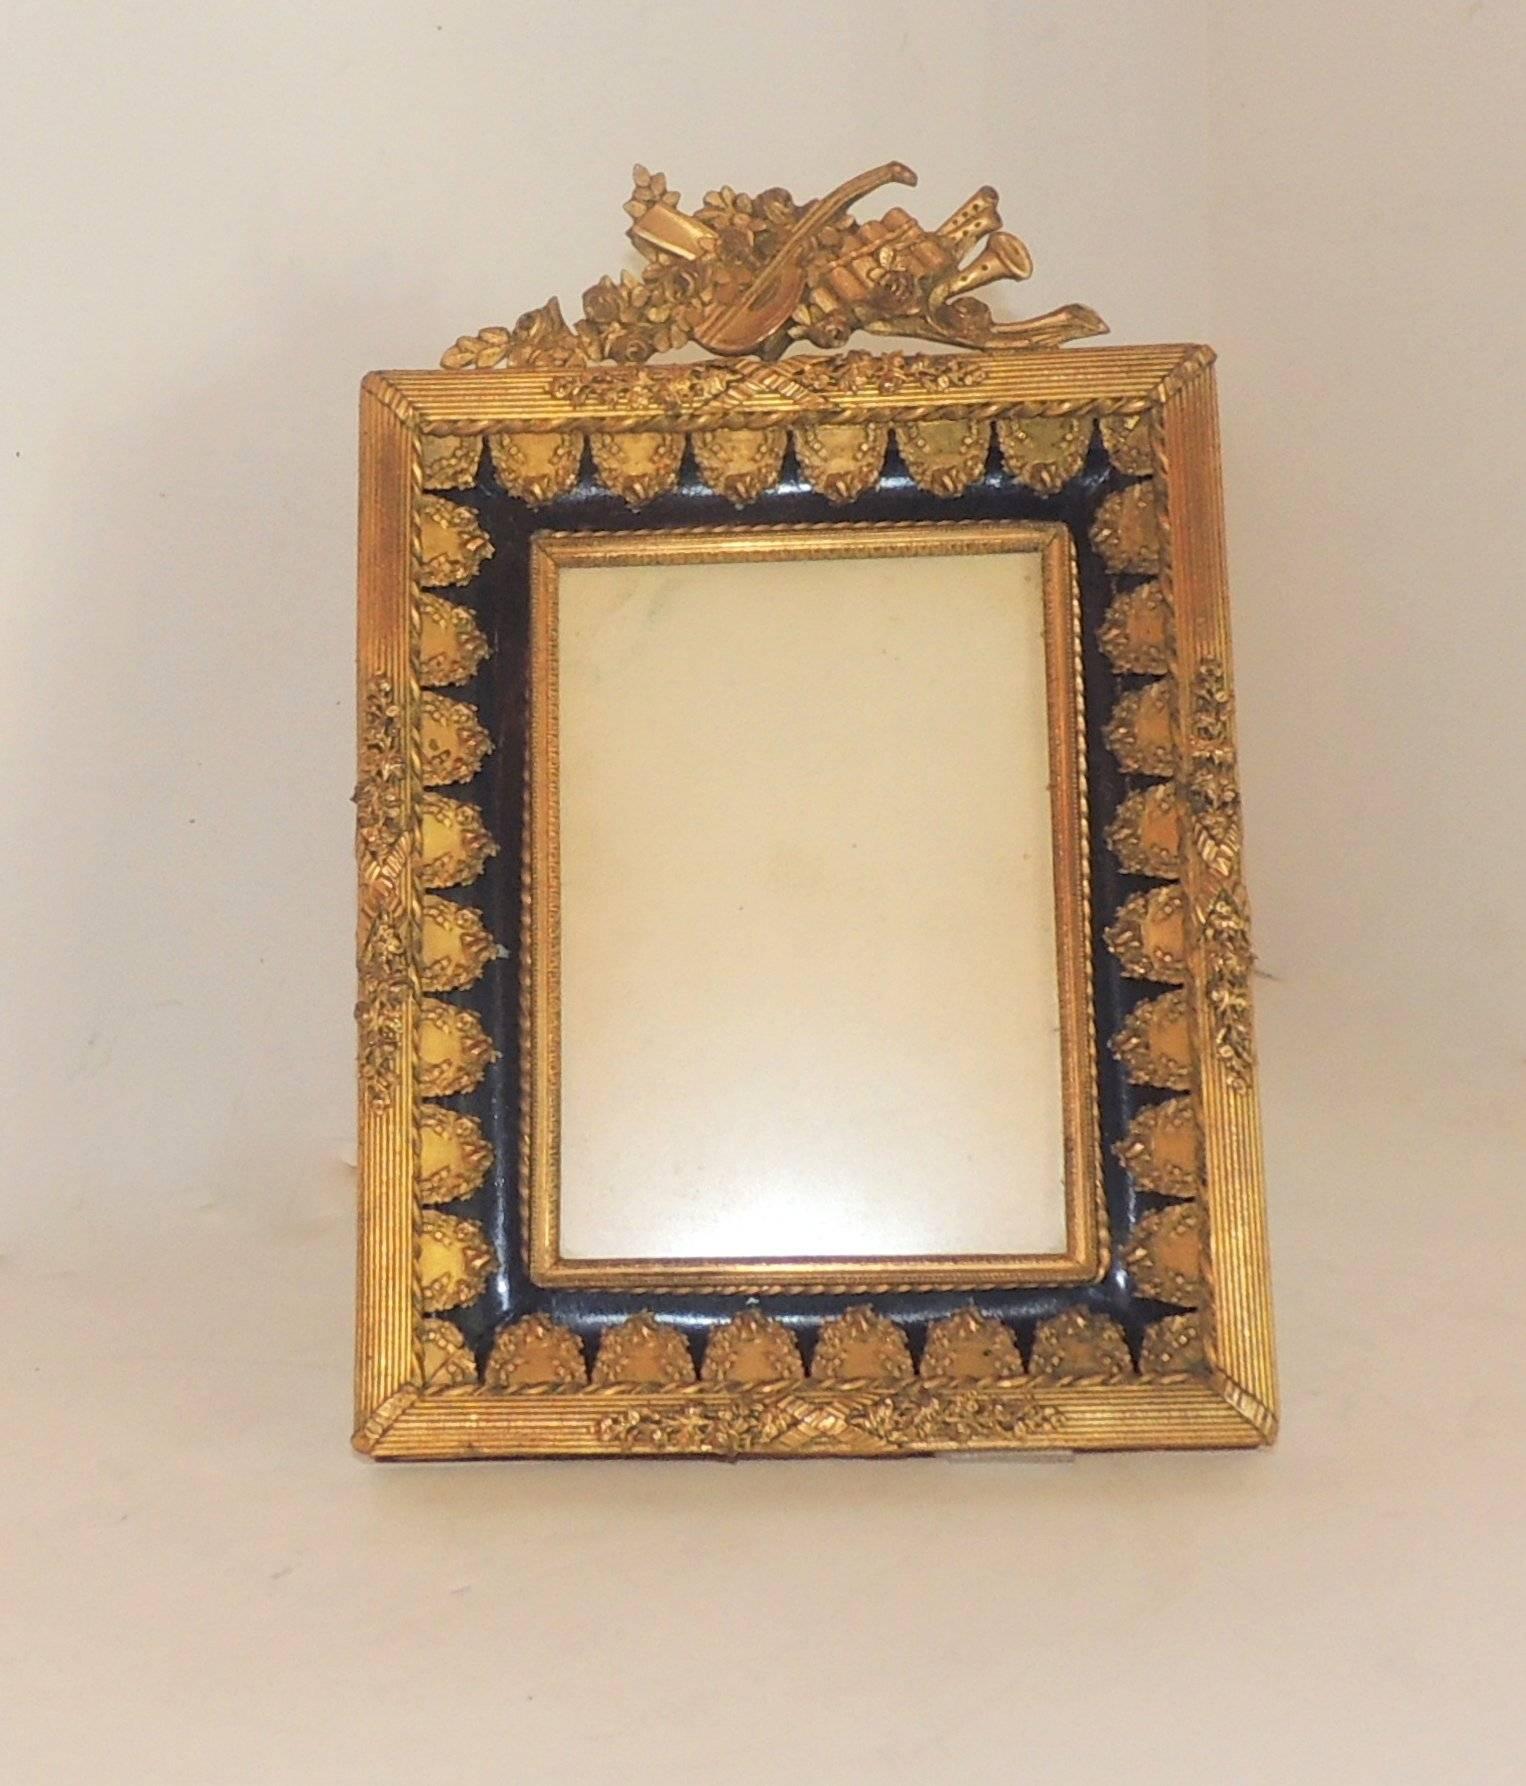 Rich blue enamel and beautifully detailed doré bronze picture frame with musical instruments and floral elements.

Measures: 9.5" H x 6.5" W.
Picture opening: 3.5" x 5.25 (4 x 6 Picture).